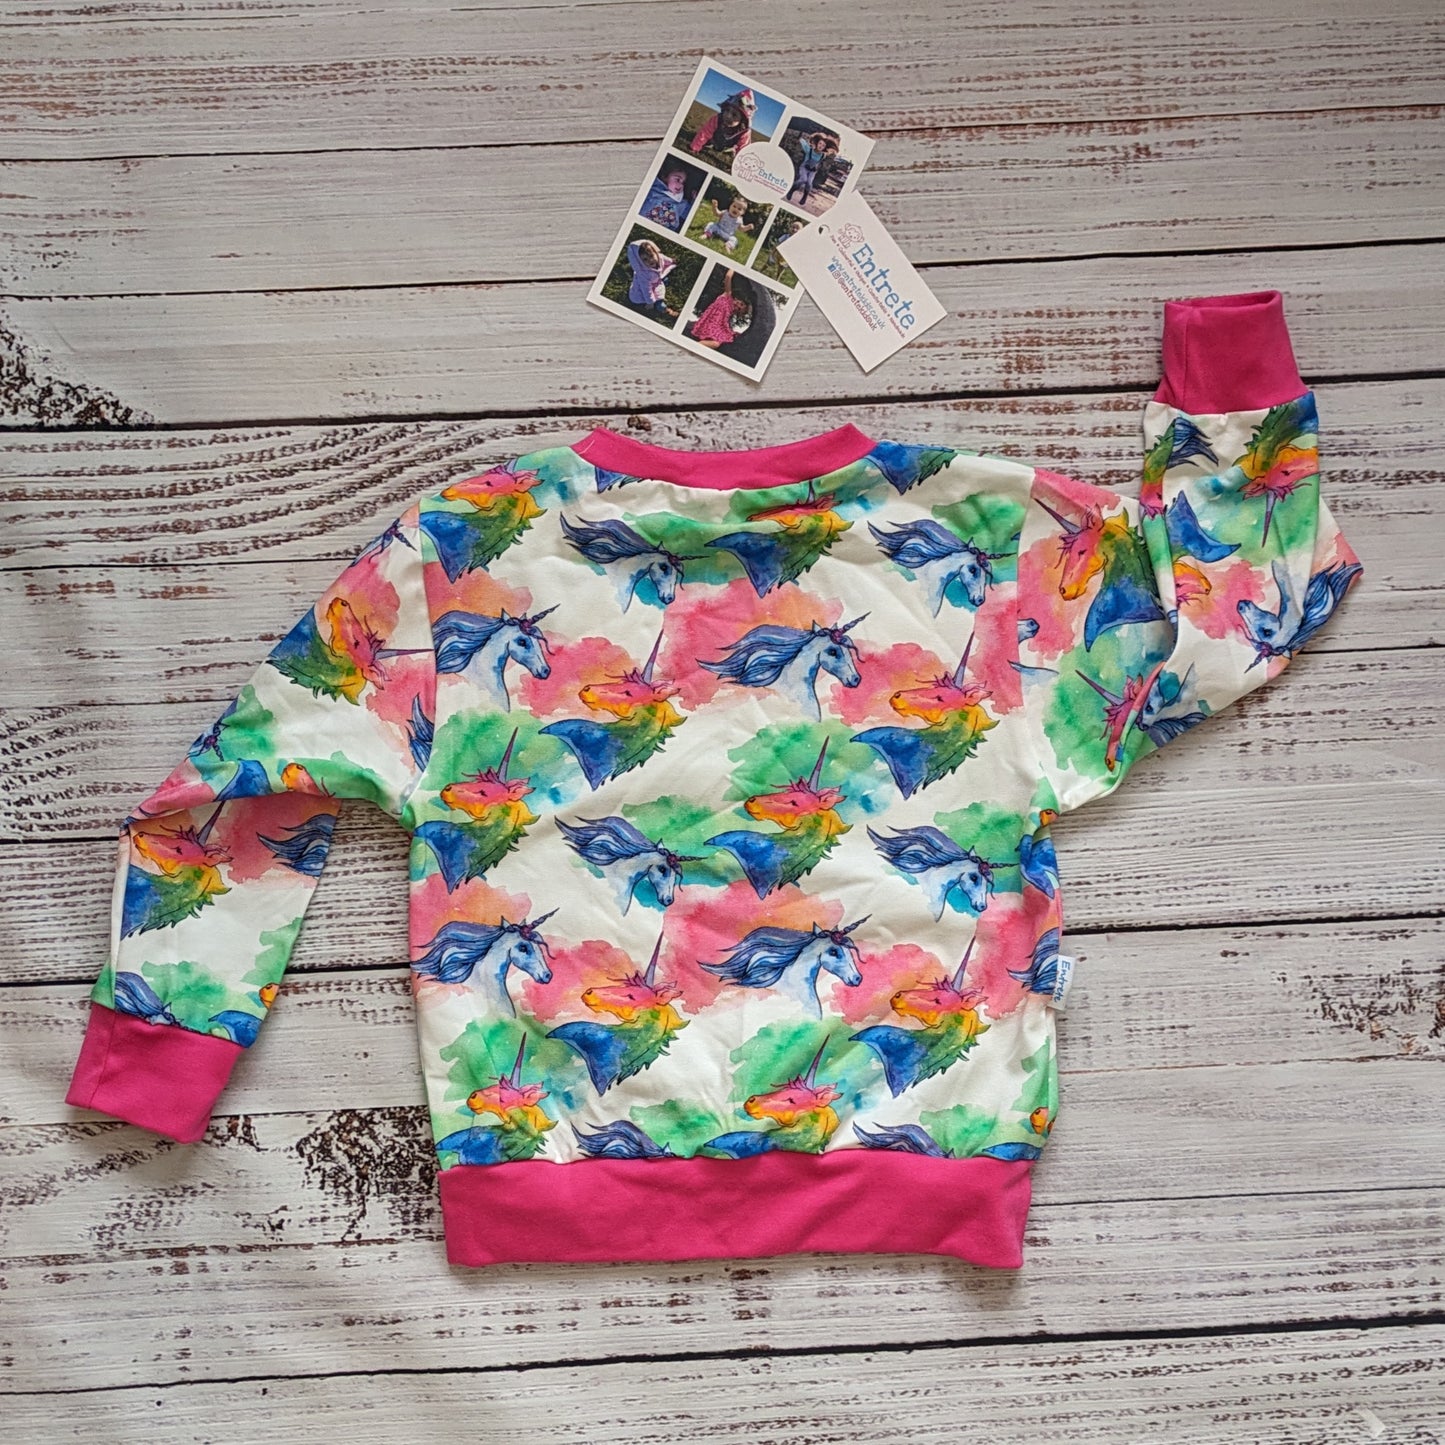 The lightweight, colourful unicorns sweatshirt. Handmade using colourful unicorns on white cotton jersey and fuchsia cotton ribbing. Shown from the rear.